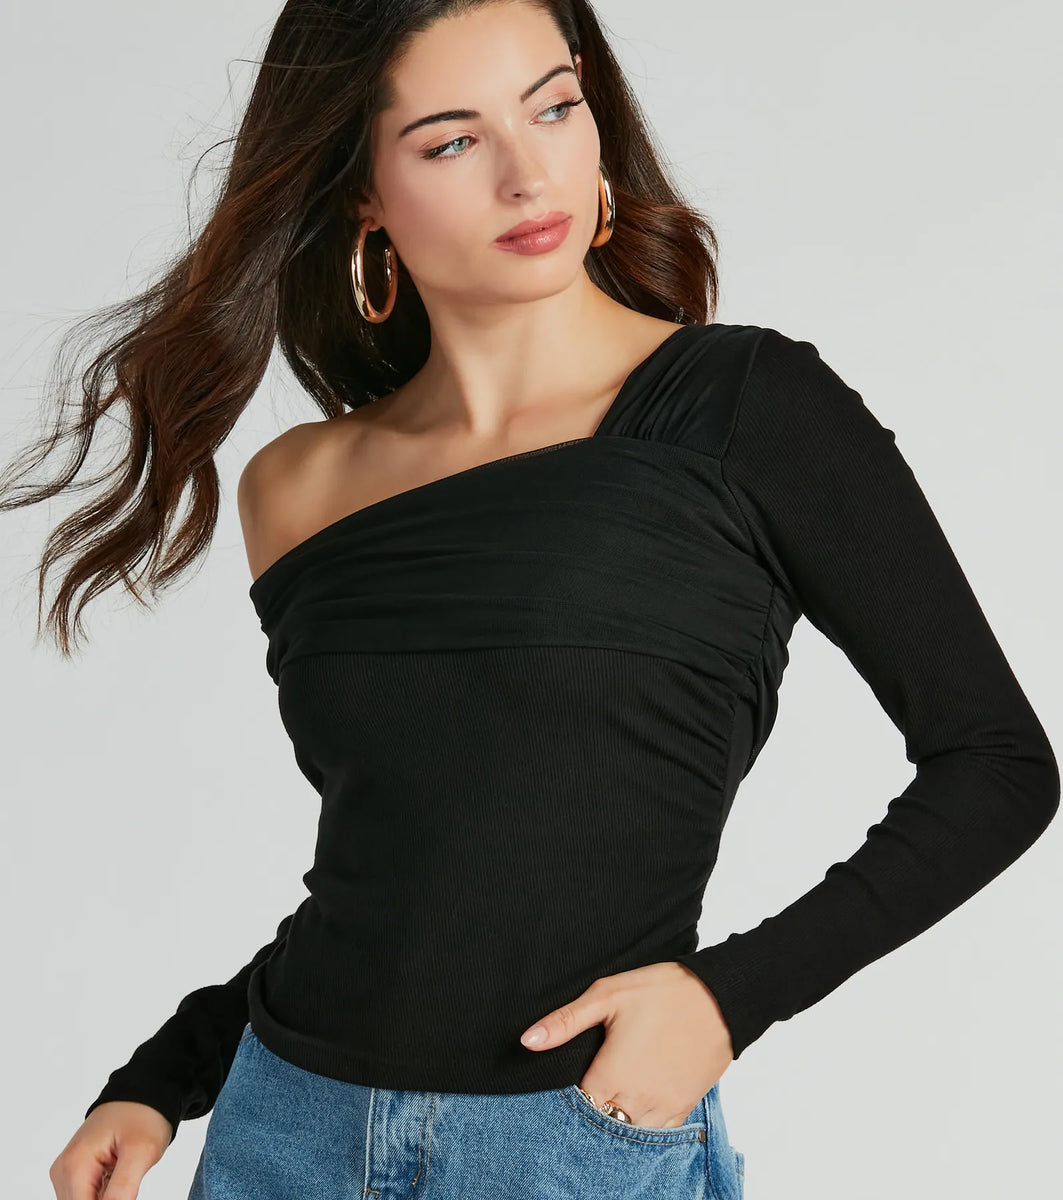 Chic Asymmetric Off-Shoulder Long Sleeve Knit Top